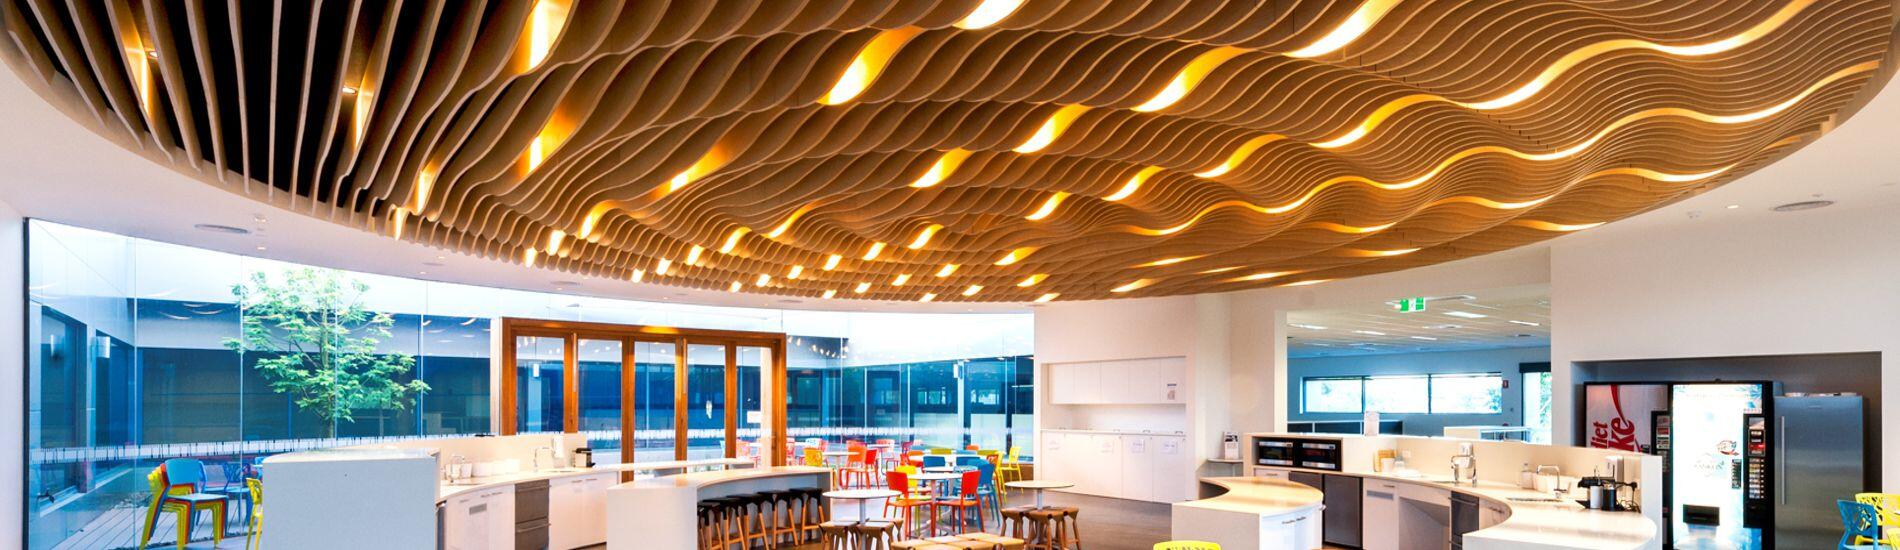 Creative WAVE BLADE Decorative Ceiling Features with Acoustic Option for Workplace